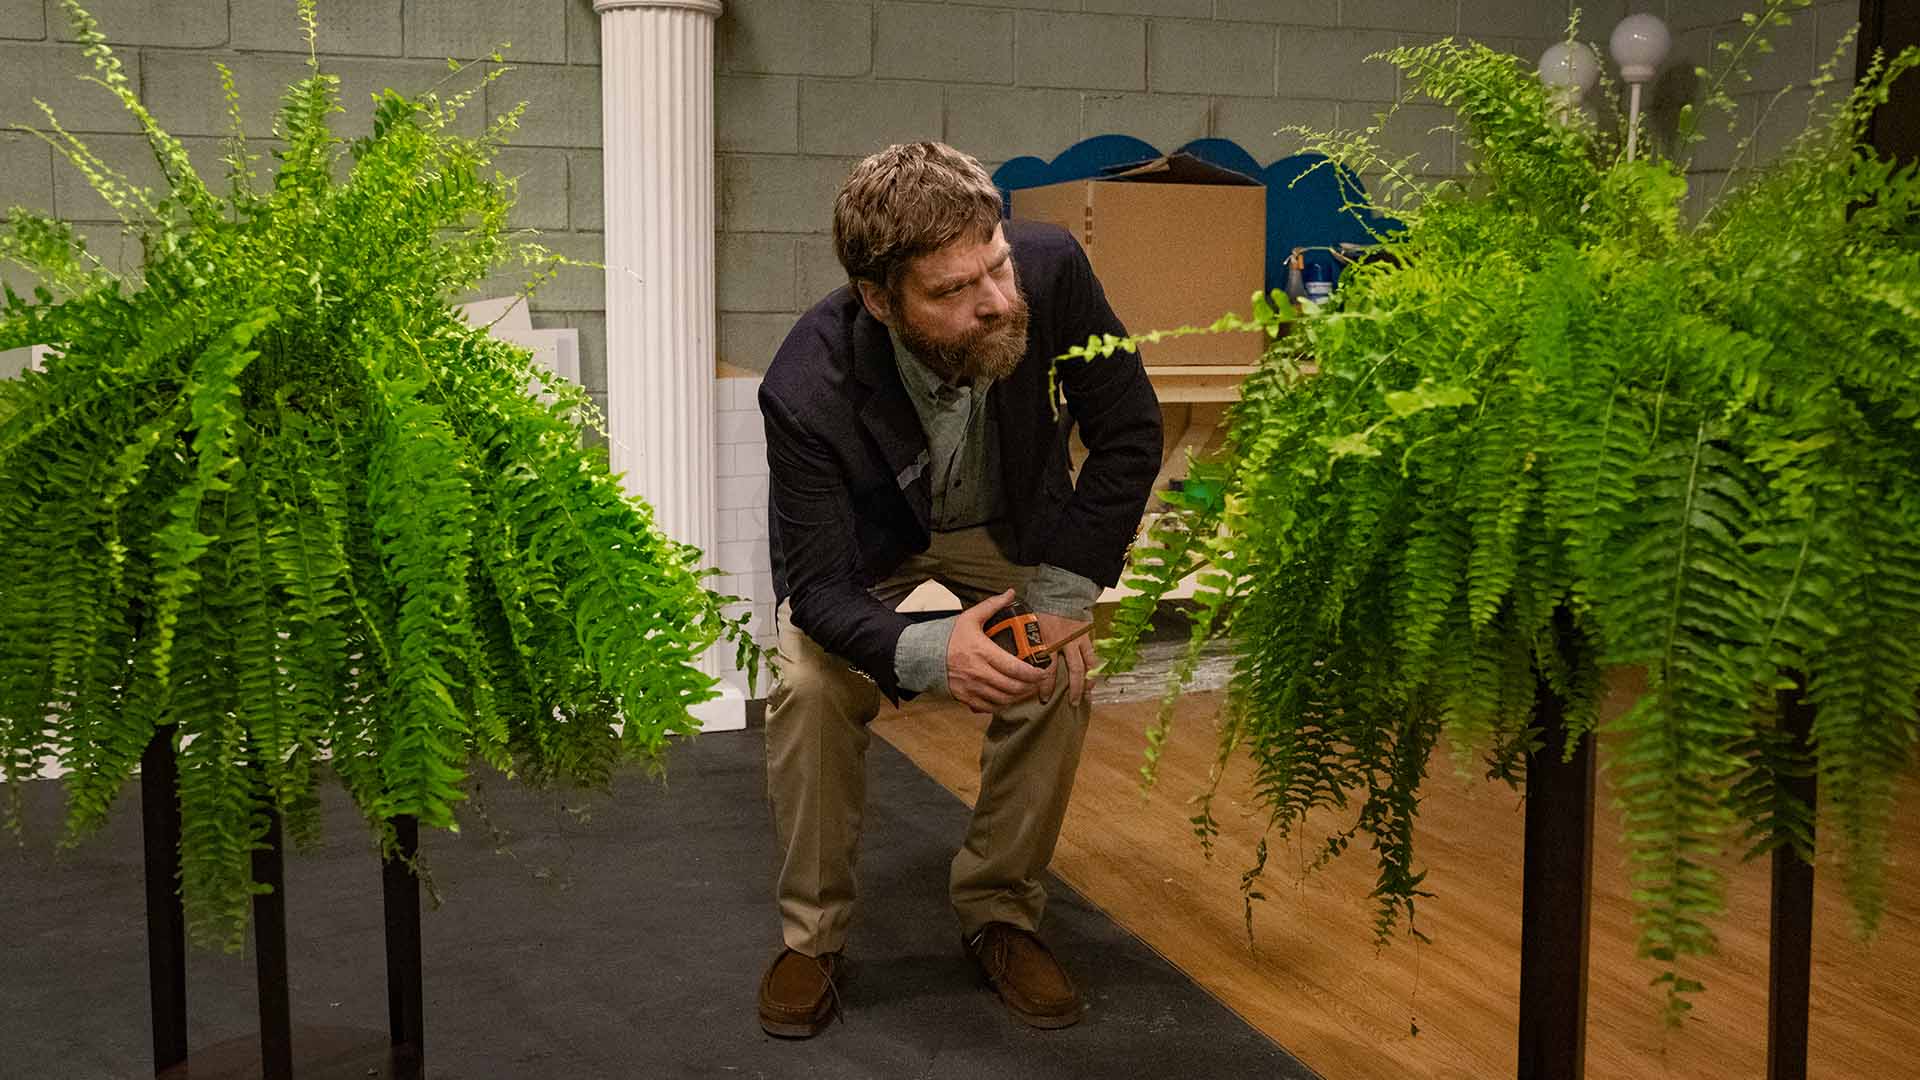 Zach Galifianakis Insults Many Celebrities in the Trailer for 'Between Two Ferns: The Movie'